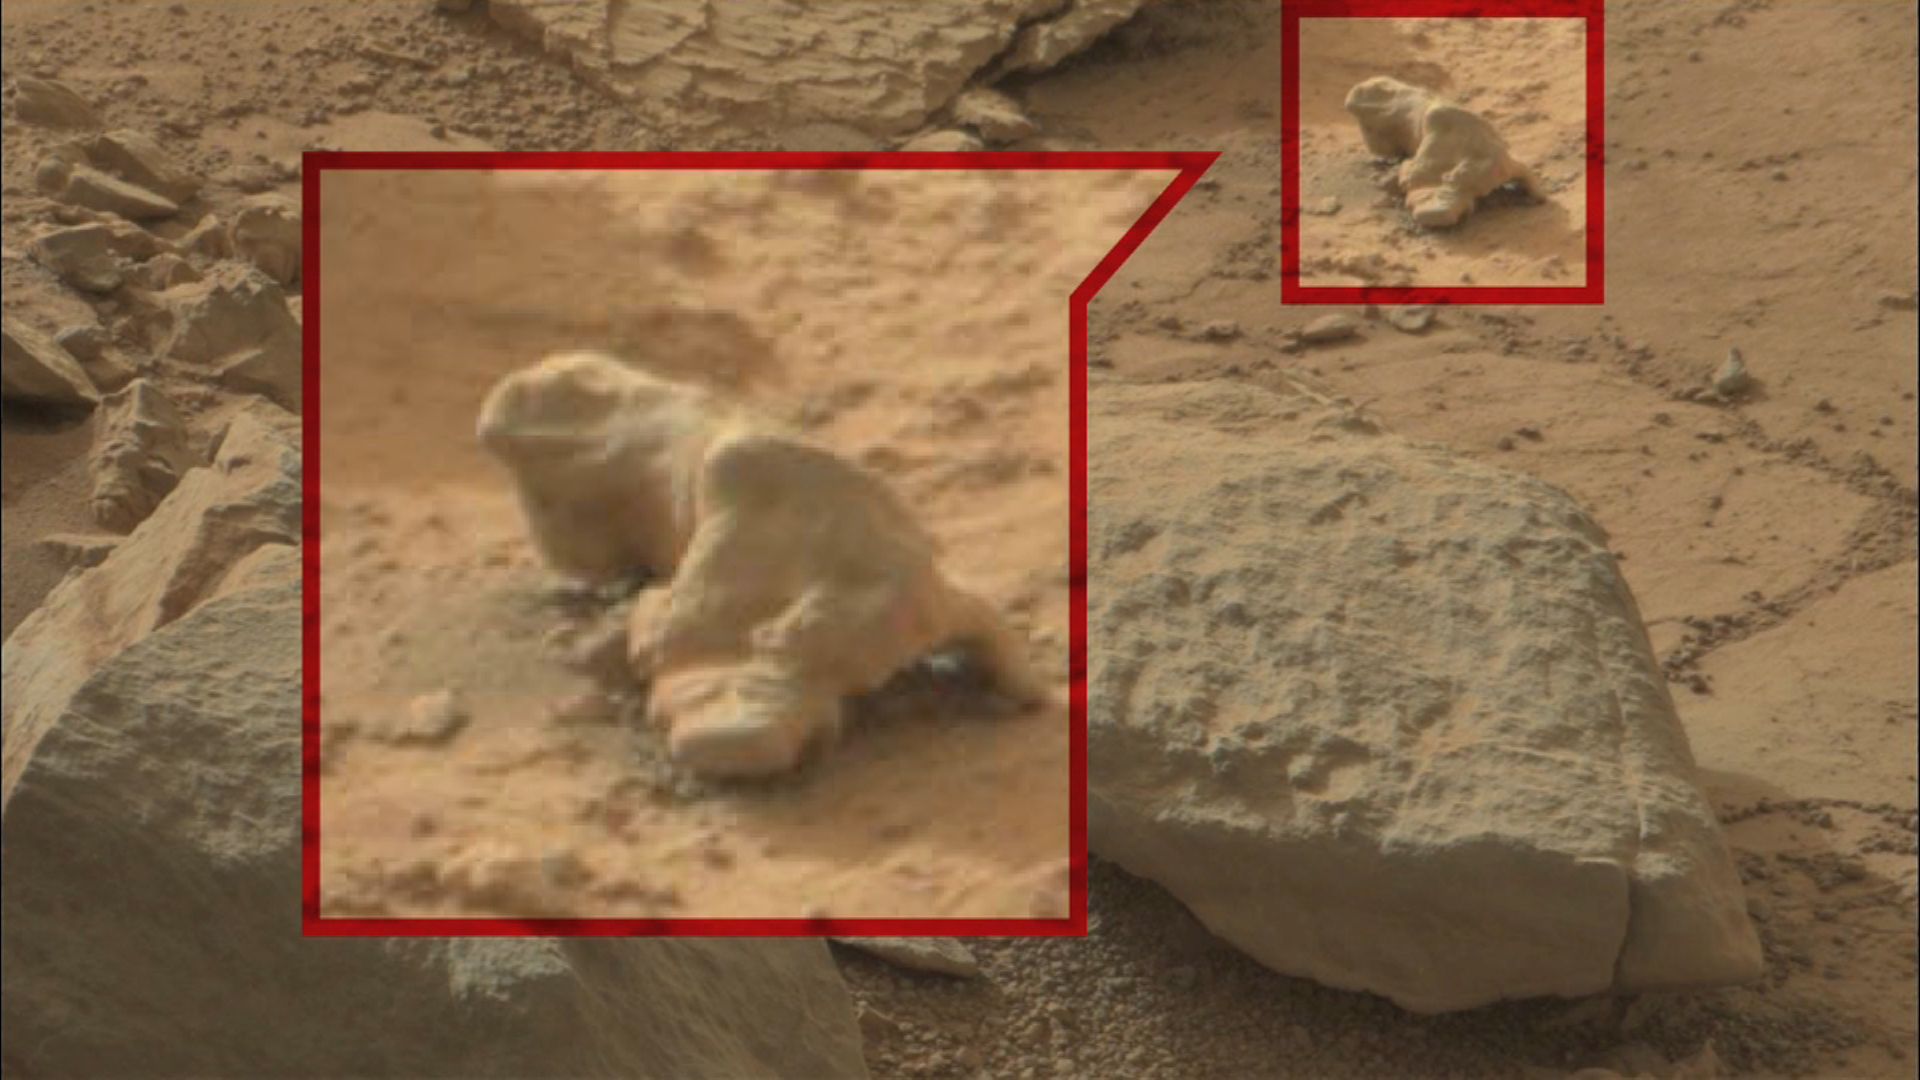 Searching for alien life in Mars photos | CNN